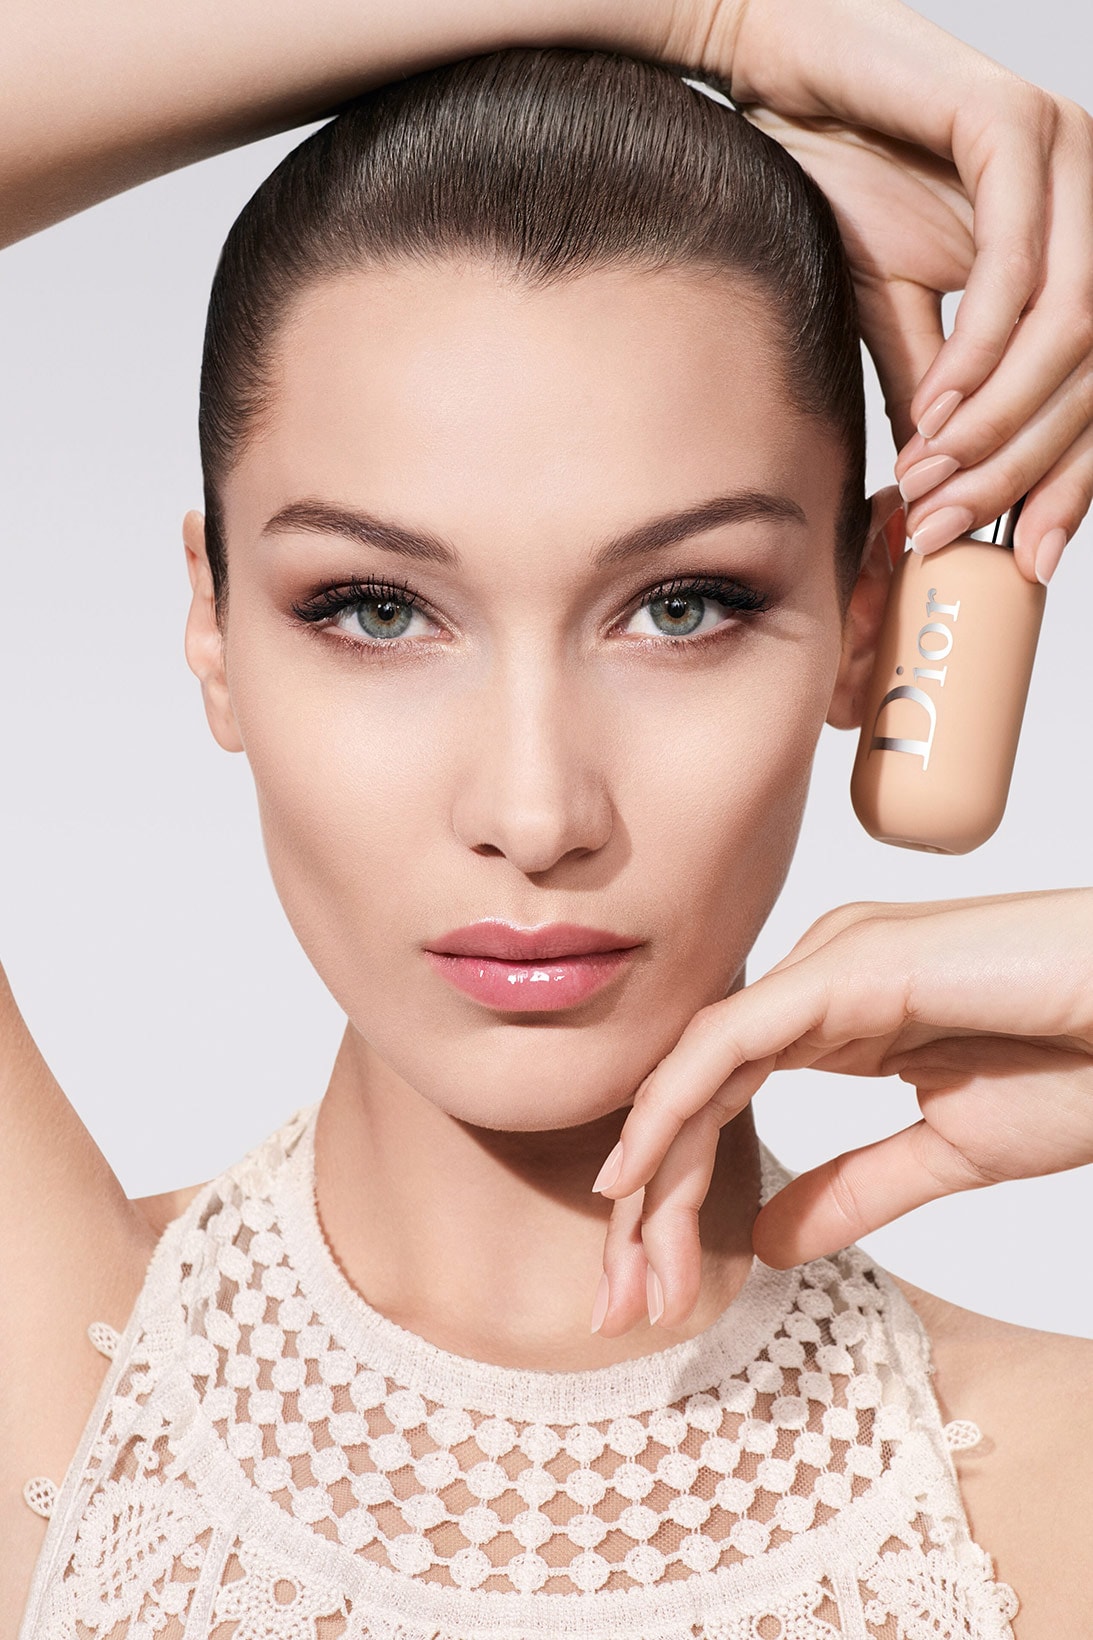 dior beauty face and body powder foundation makeup peter philips bella hadid